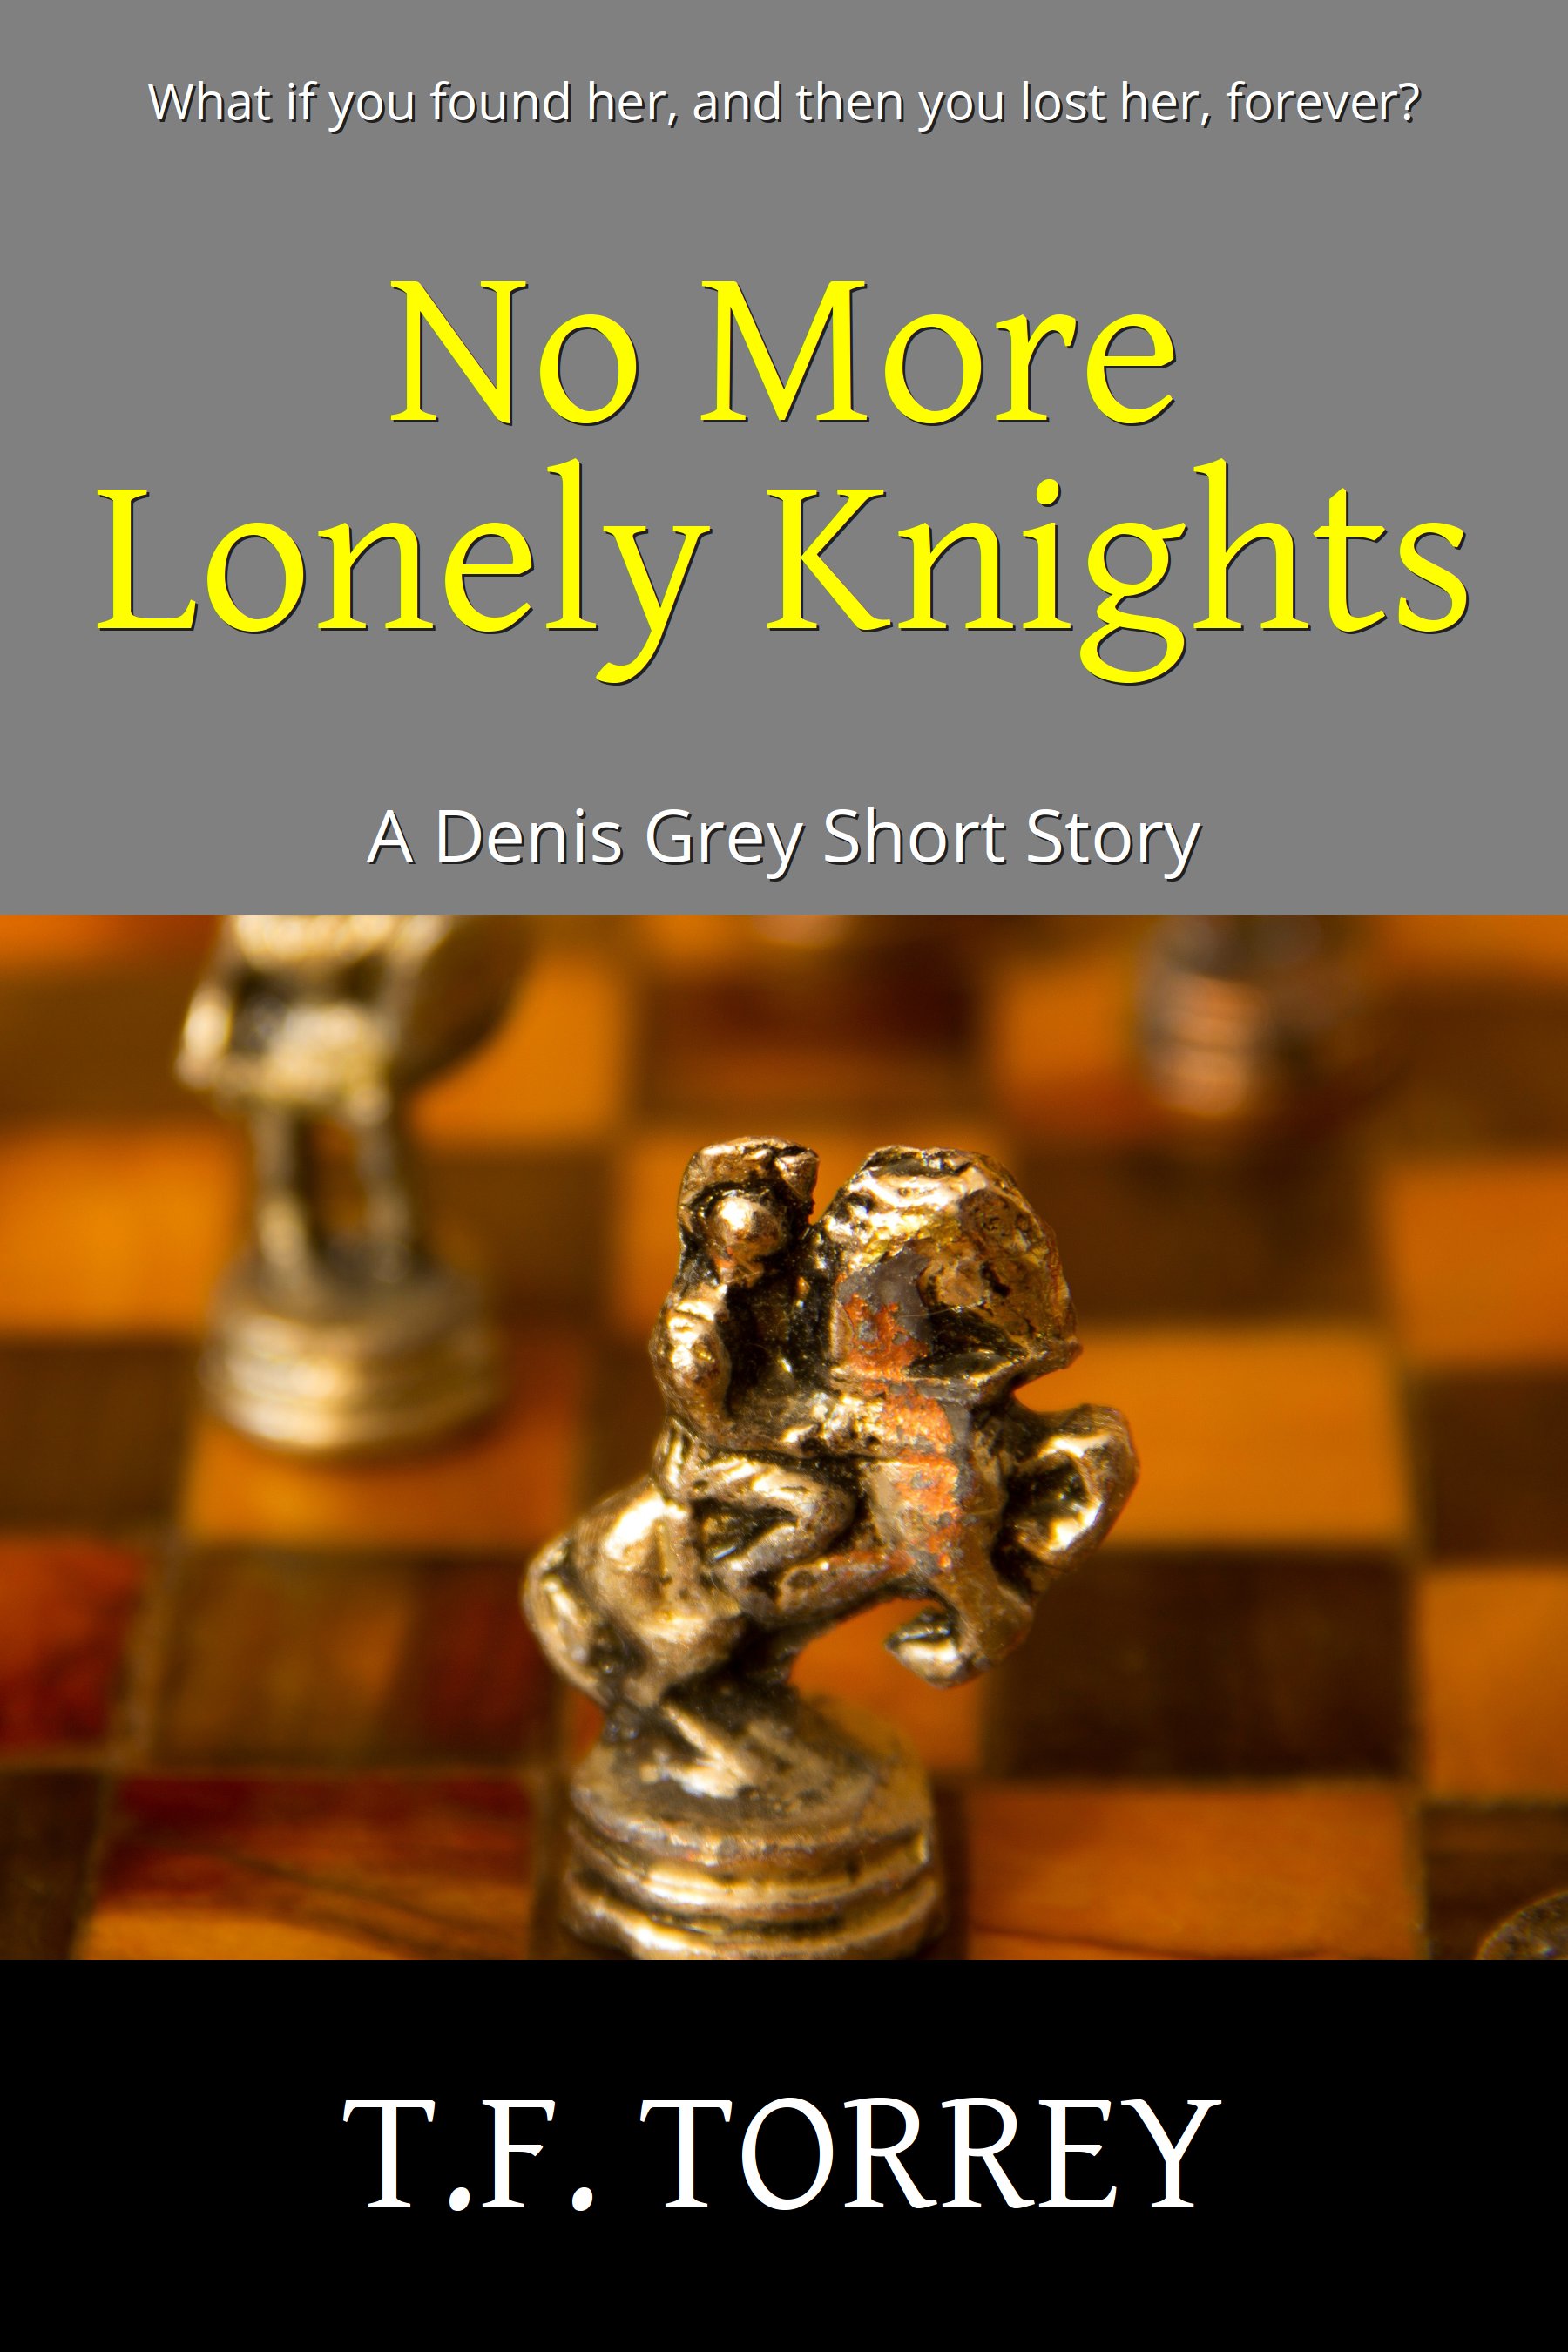 Cover of No More Lonely Knights: A Denis Grey Short Story by T.F. Torrey